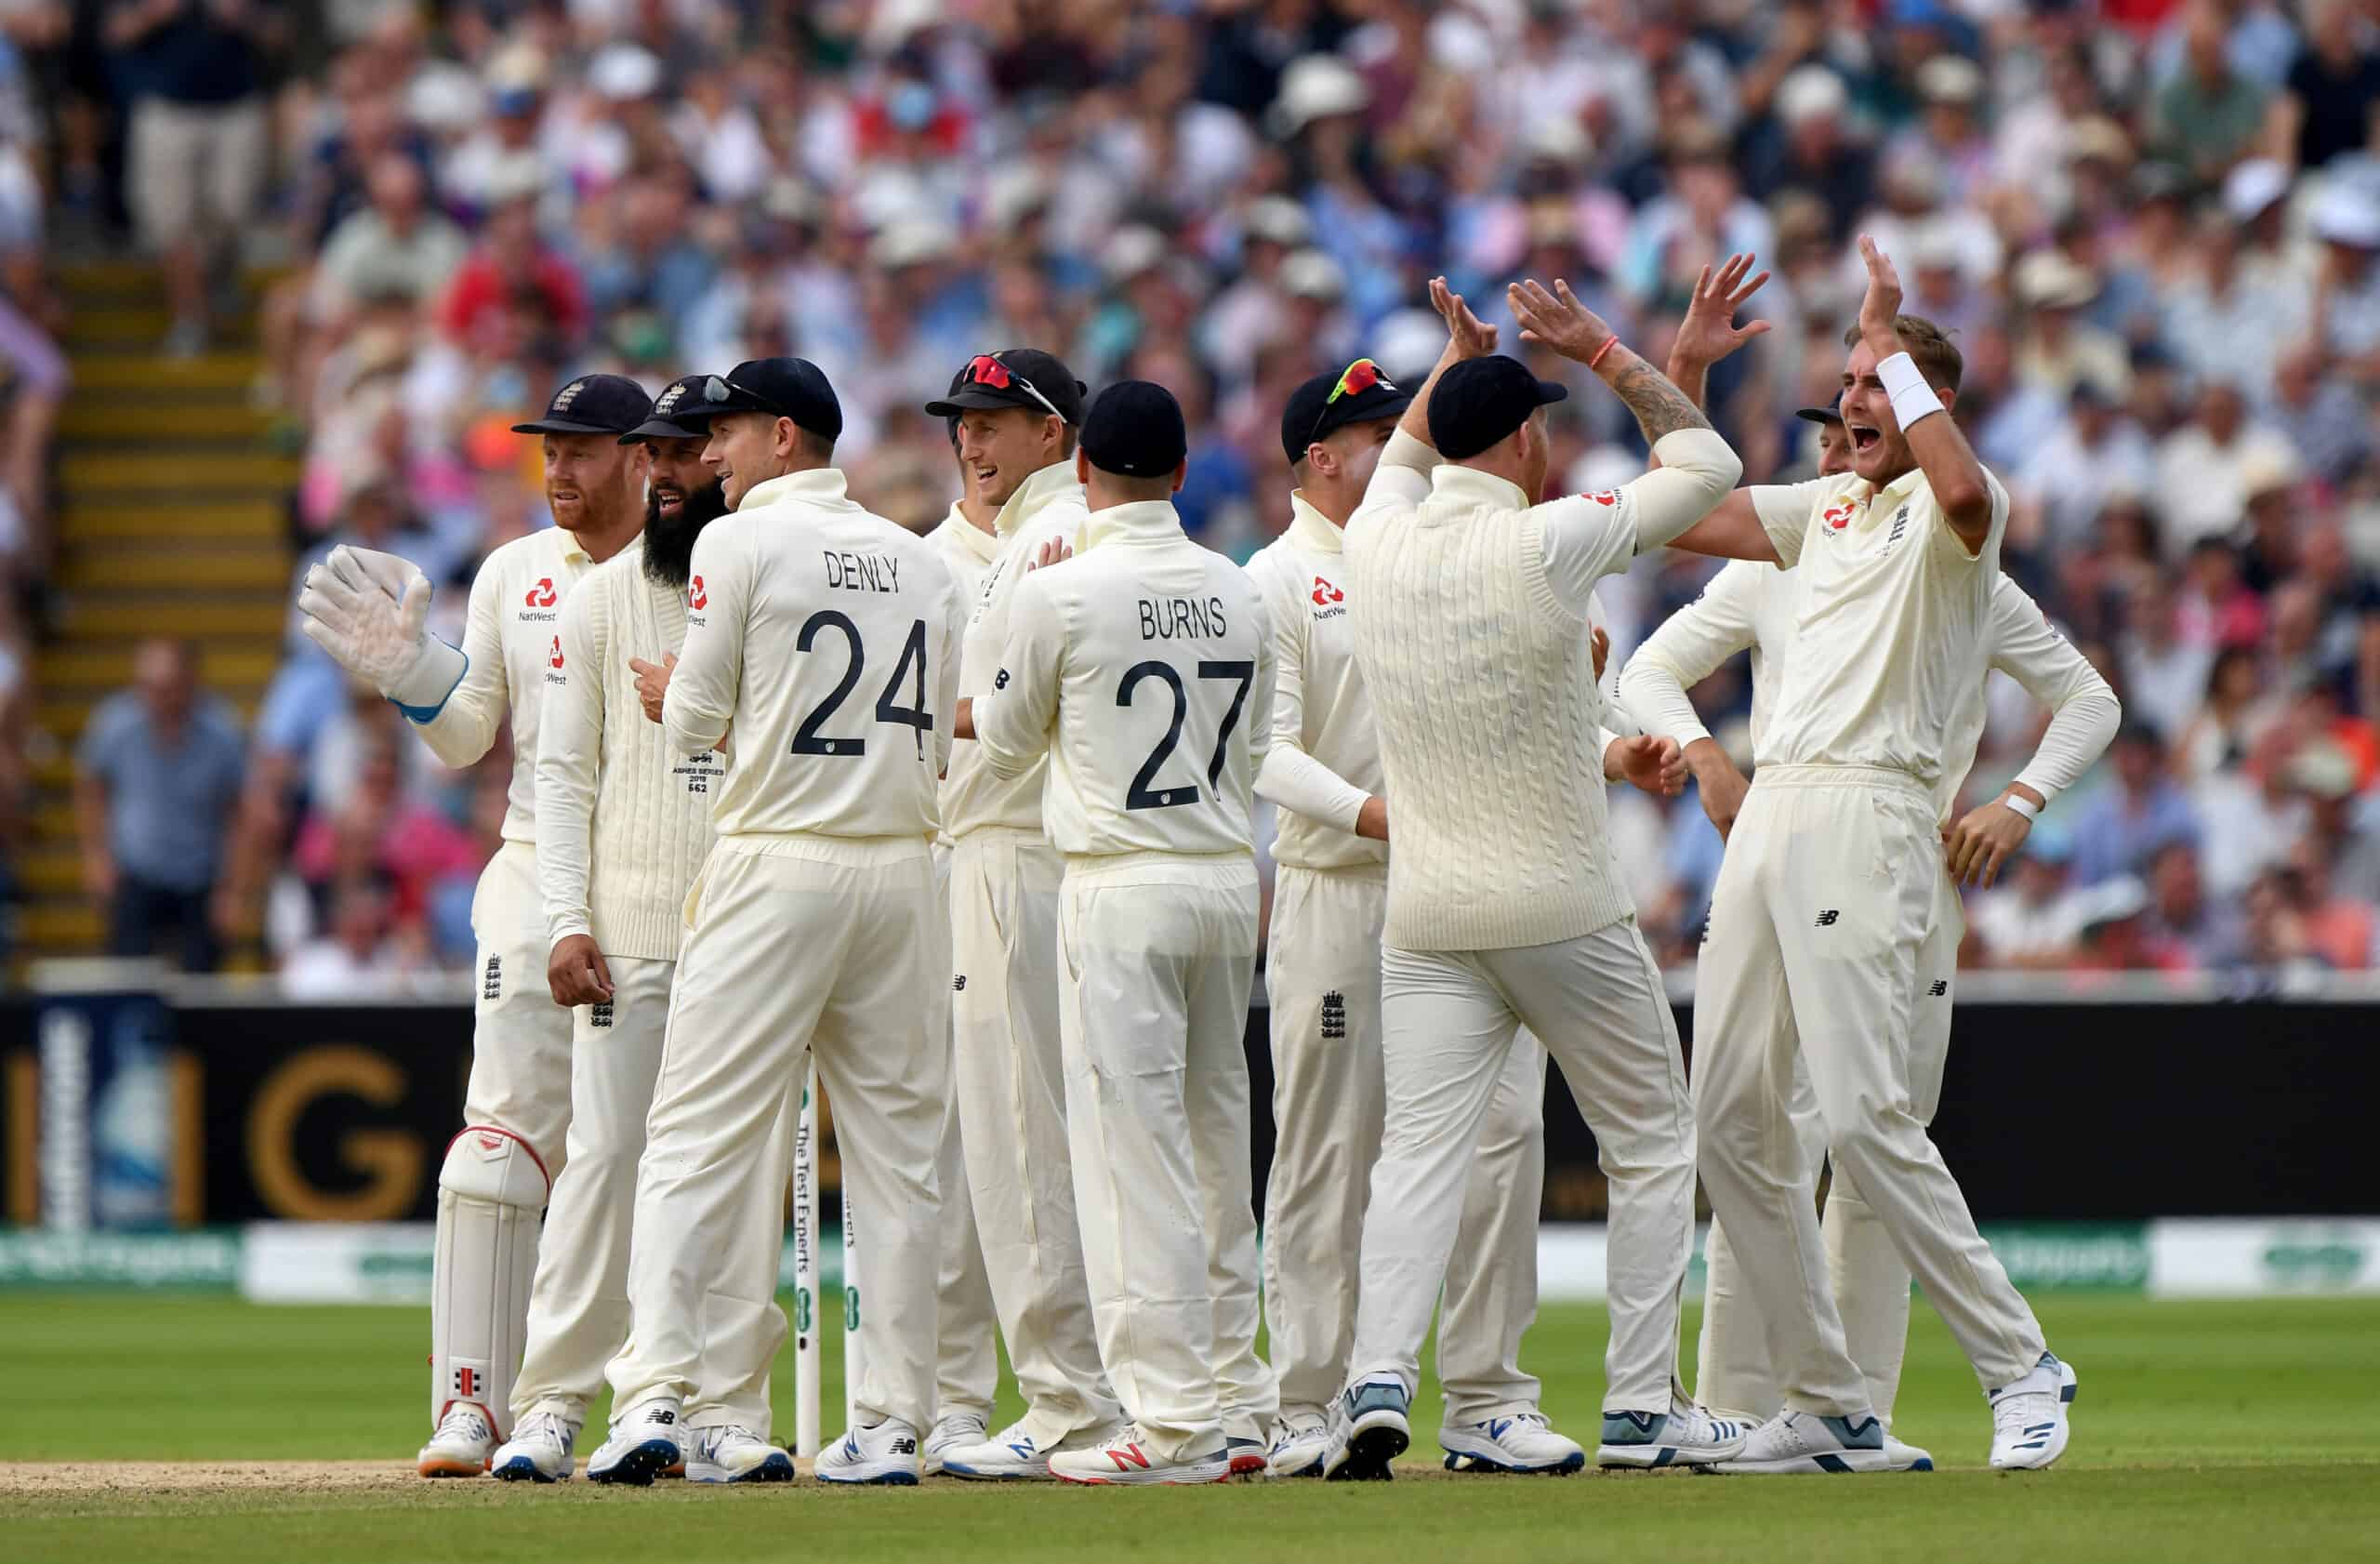 Can England Make a Stunning Ashes Comeback?